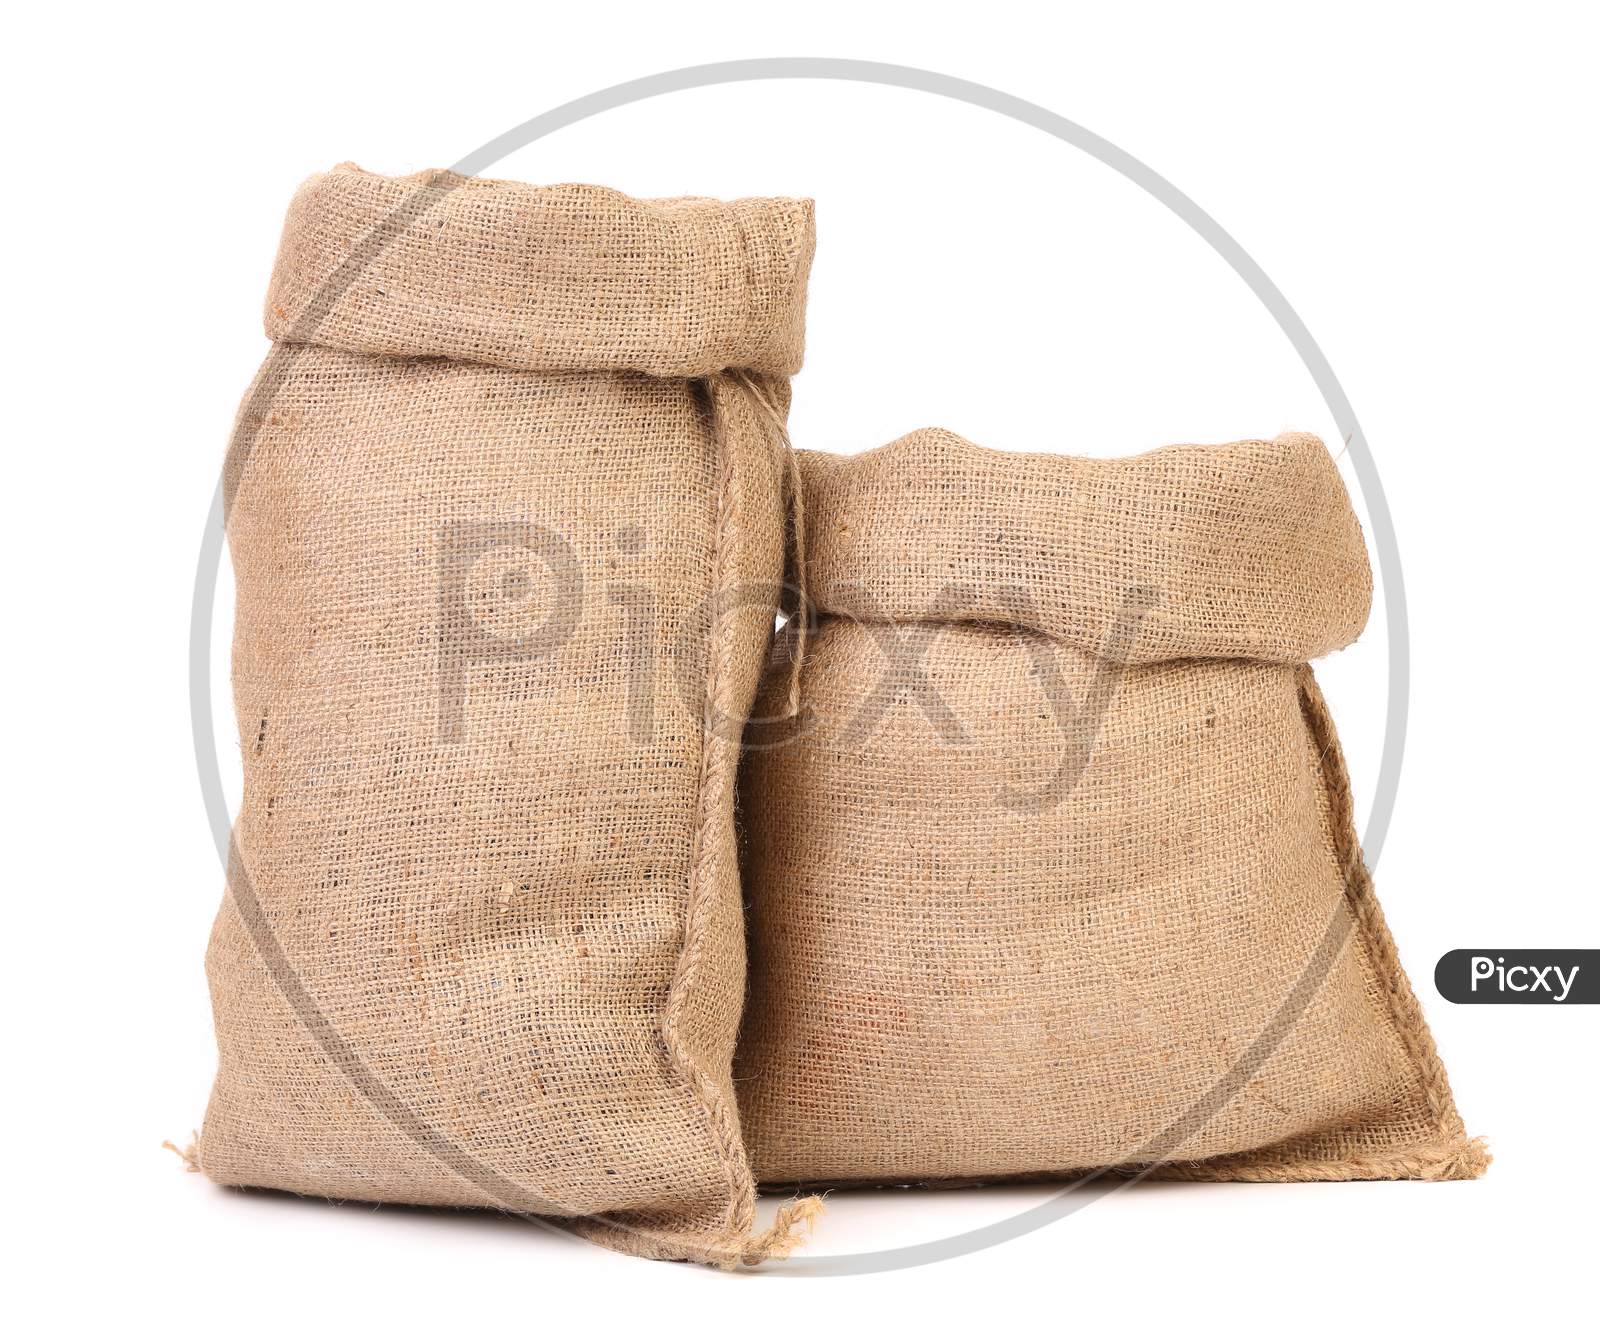 Two Open Bags From A Sacking. Isolated On A White Background